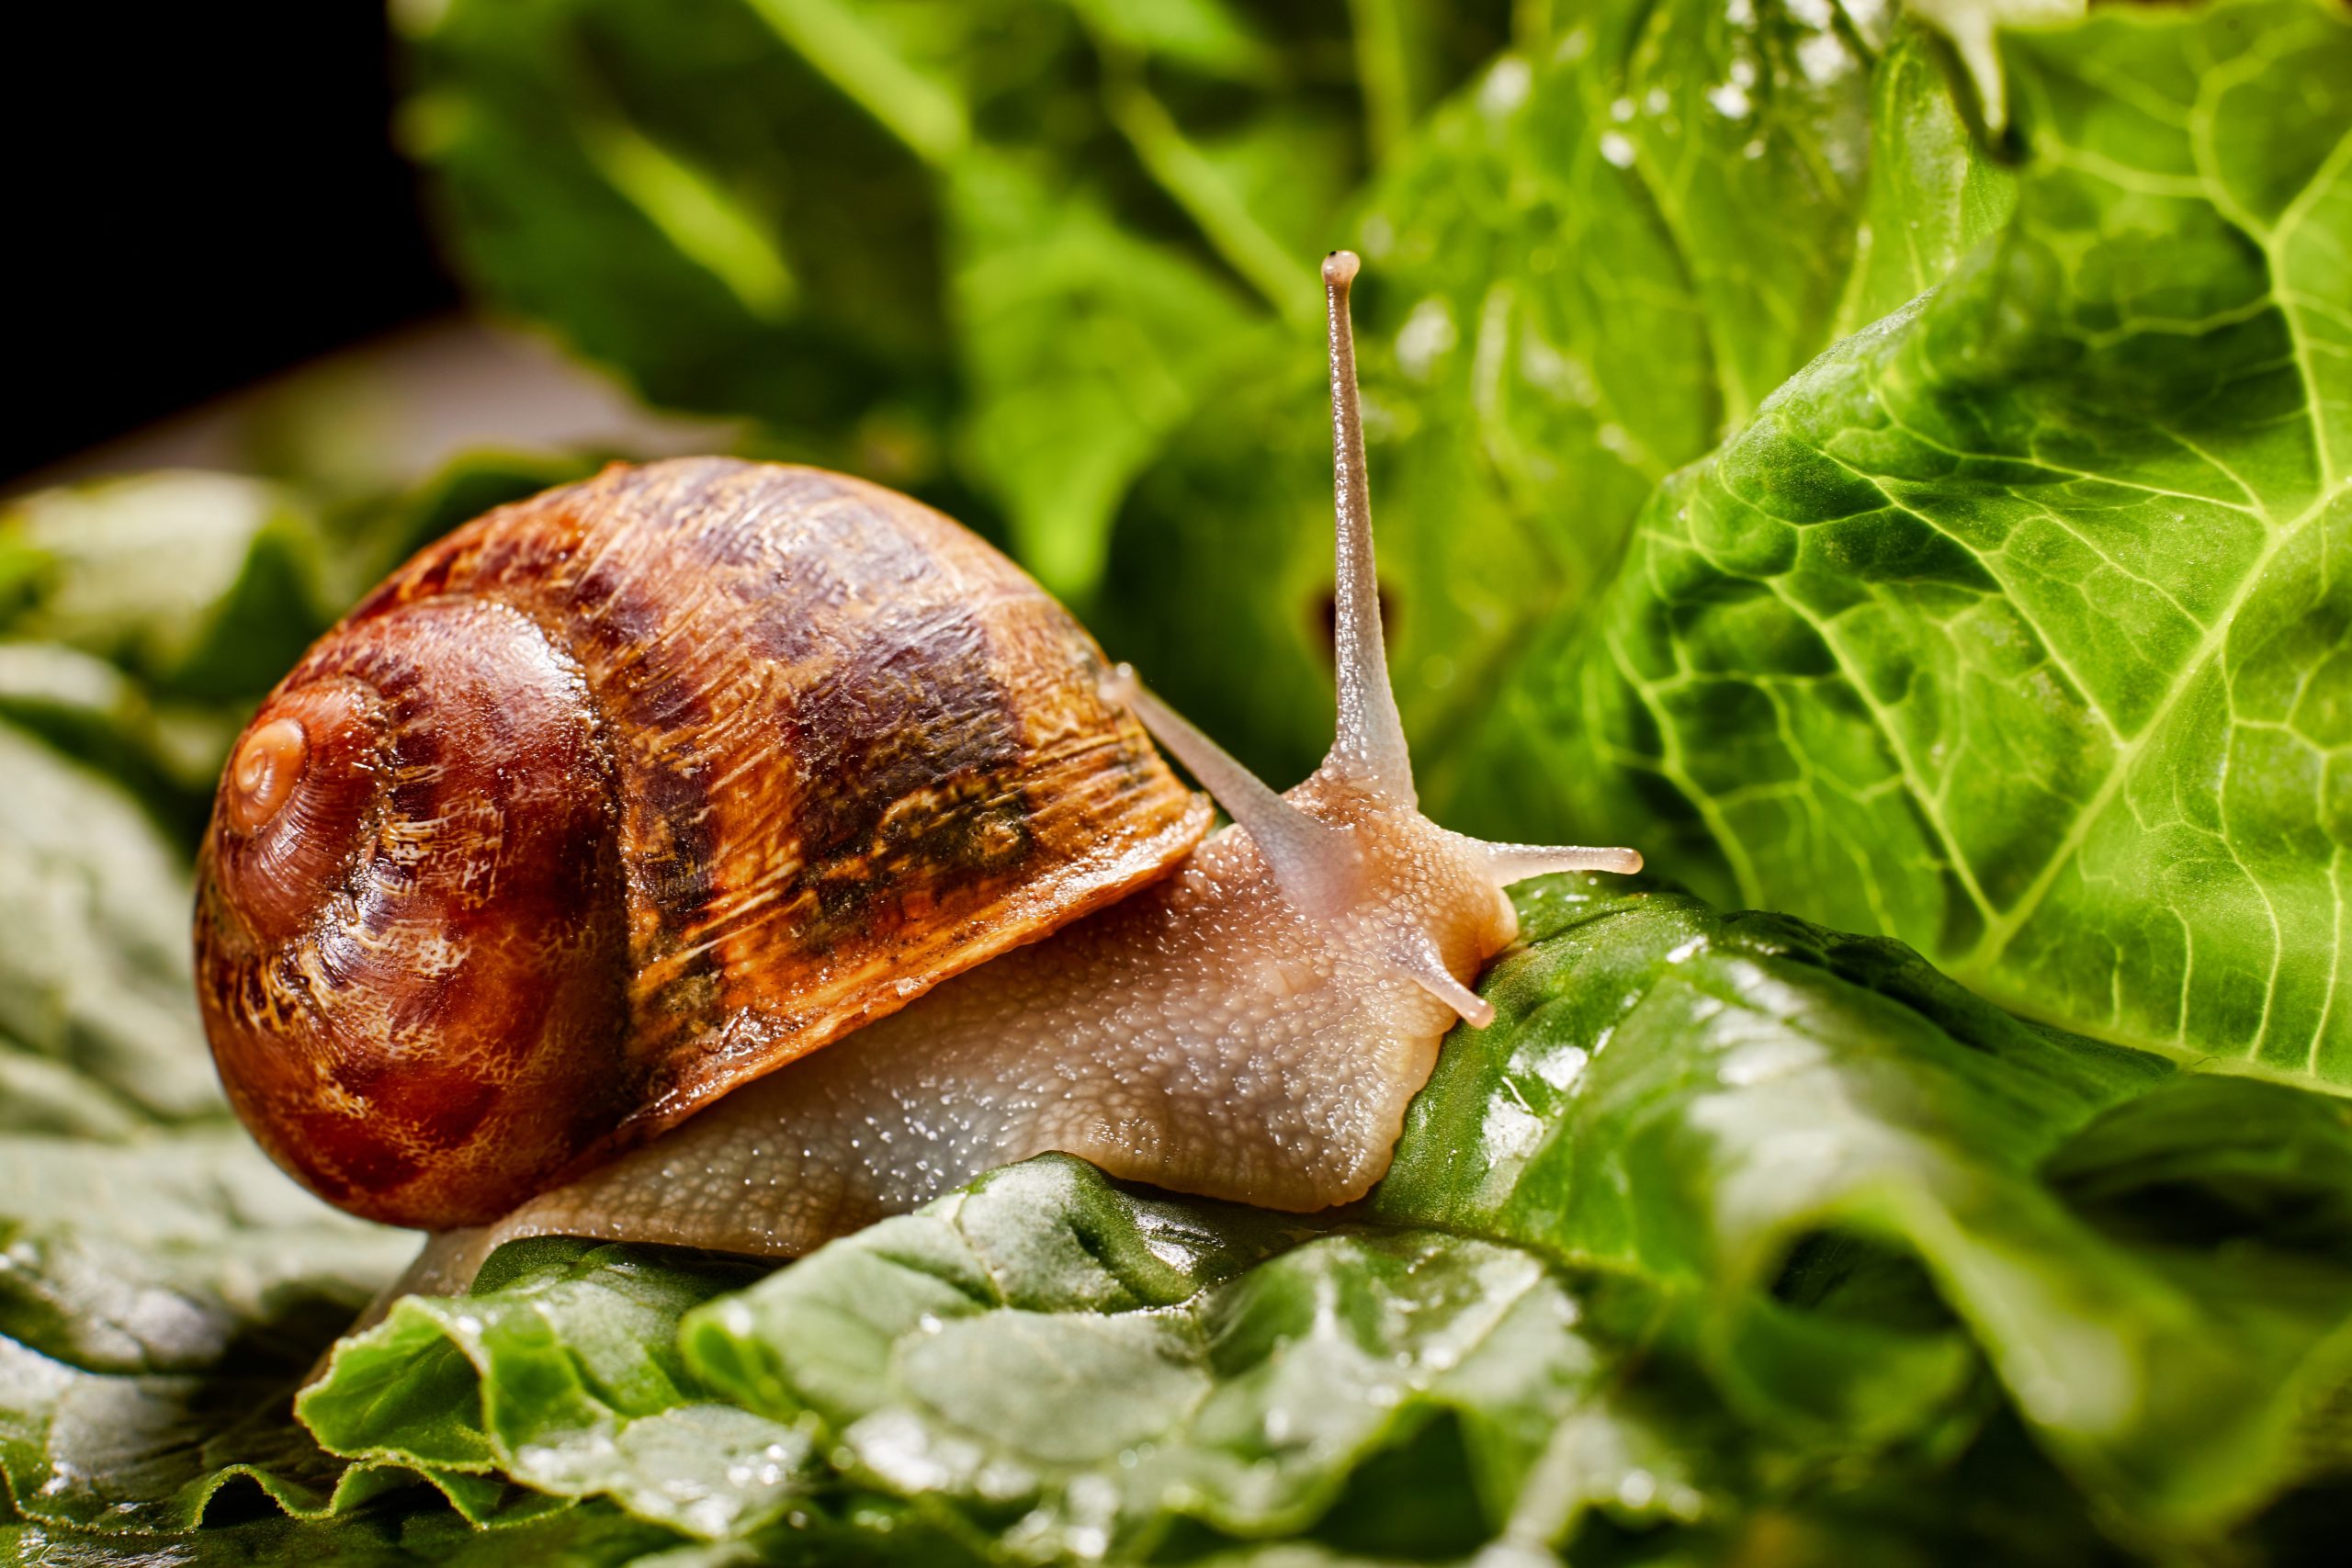 Are Snails Good For Your Garden?